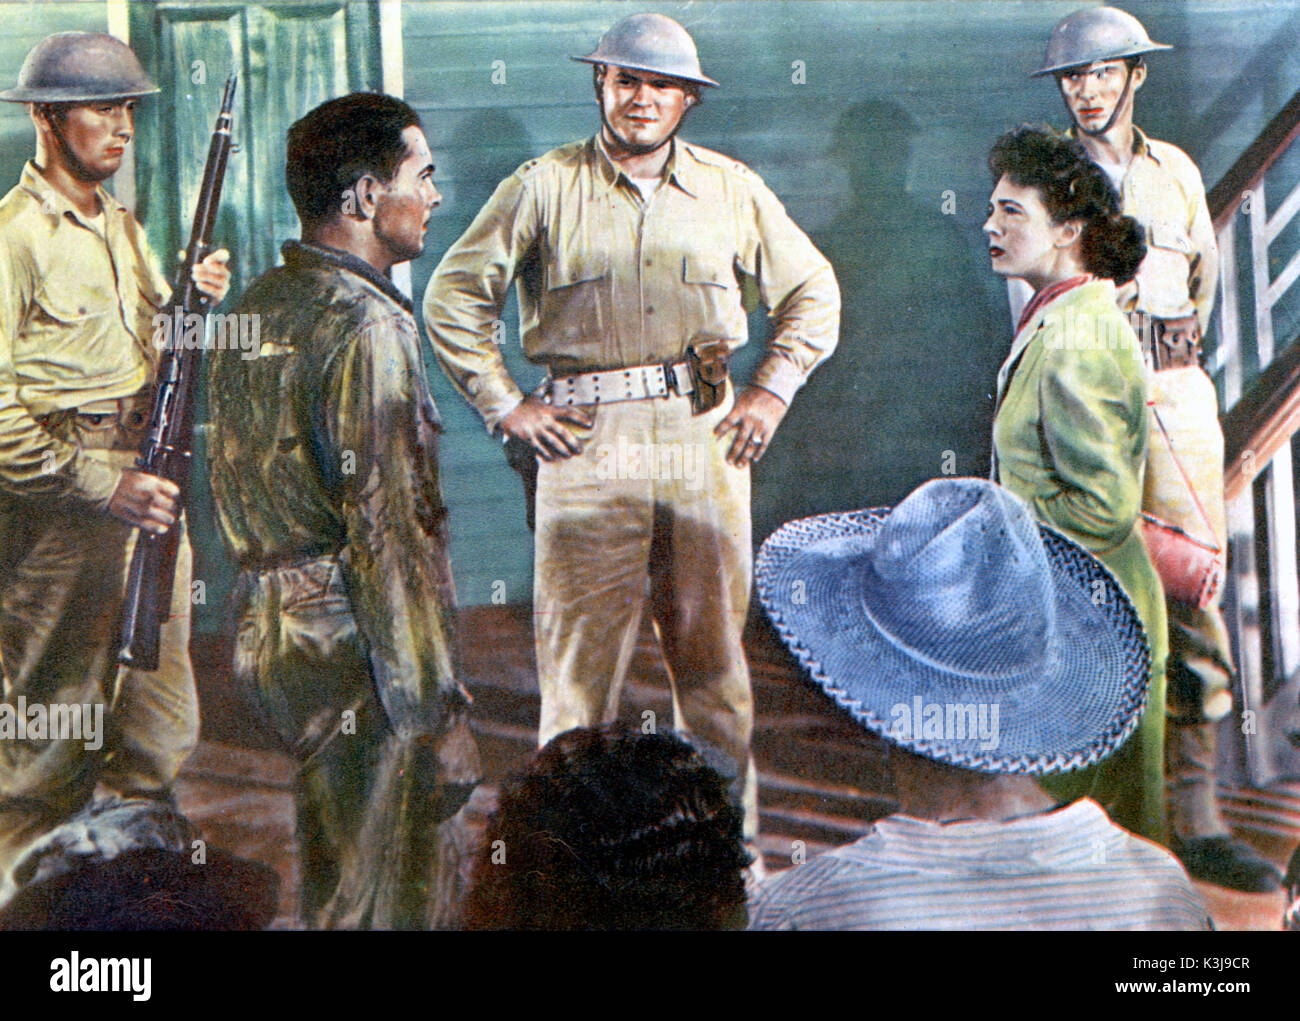 AMERICAN GUERILLA IN THE PHILIPPINES  TYRONE POWER, MICHELINE PRESLE AMERICAN GUERILLA IN THE PHILIPPINES [US 1950] [BR Title] - I SHALL RETURN TYRONE POWER, MICHELINE PRESLE Stock Photo